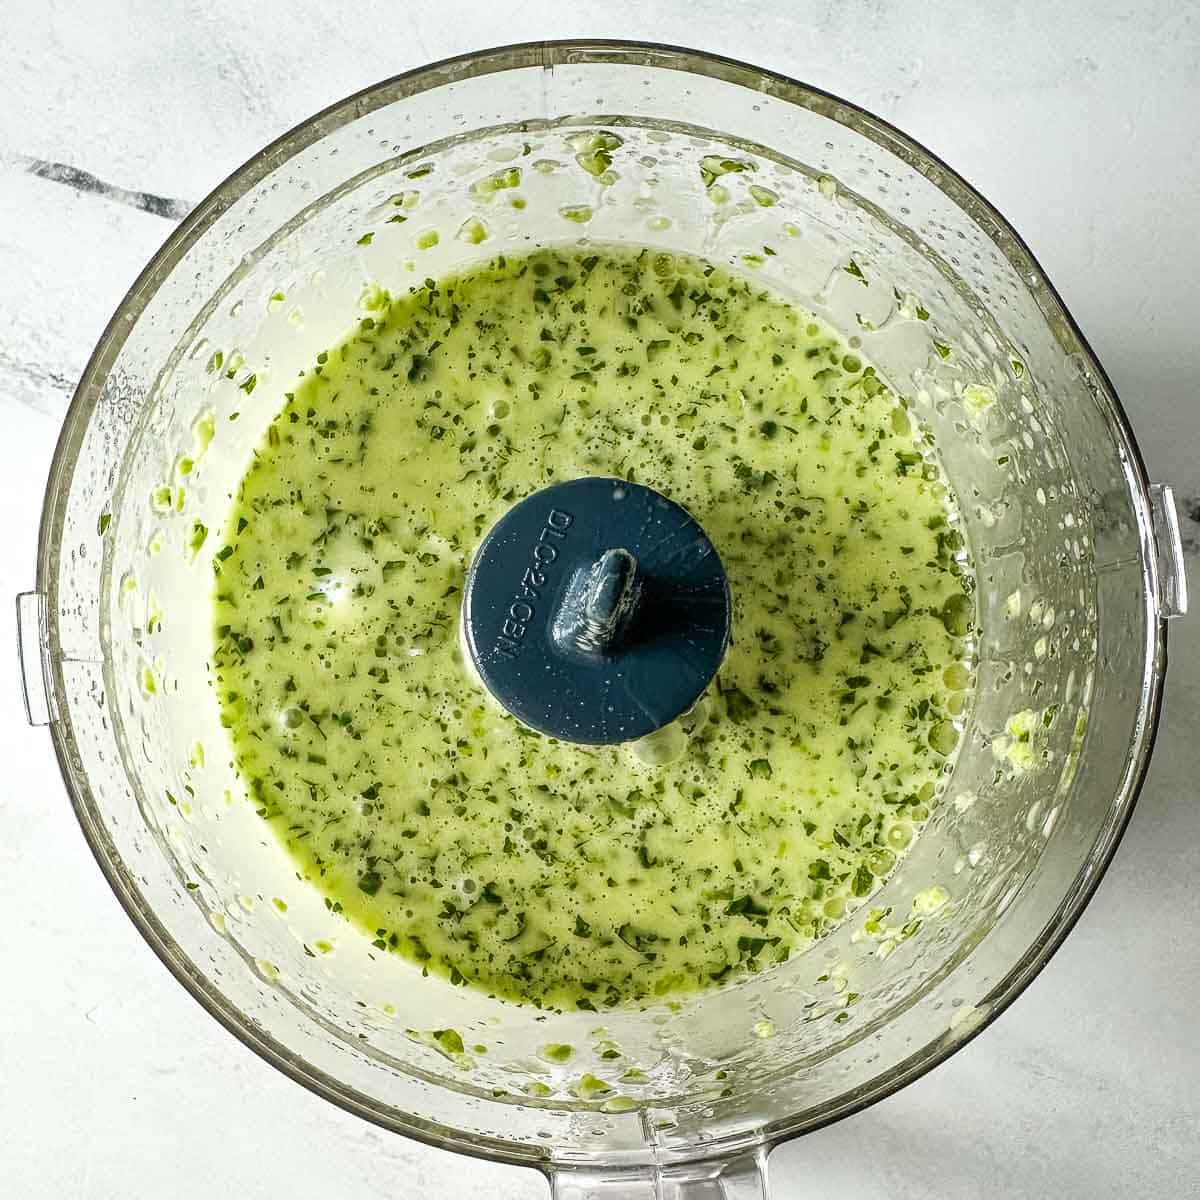 The blended vinaigrette is shown in a mini food processor.